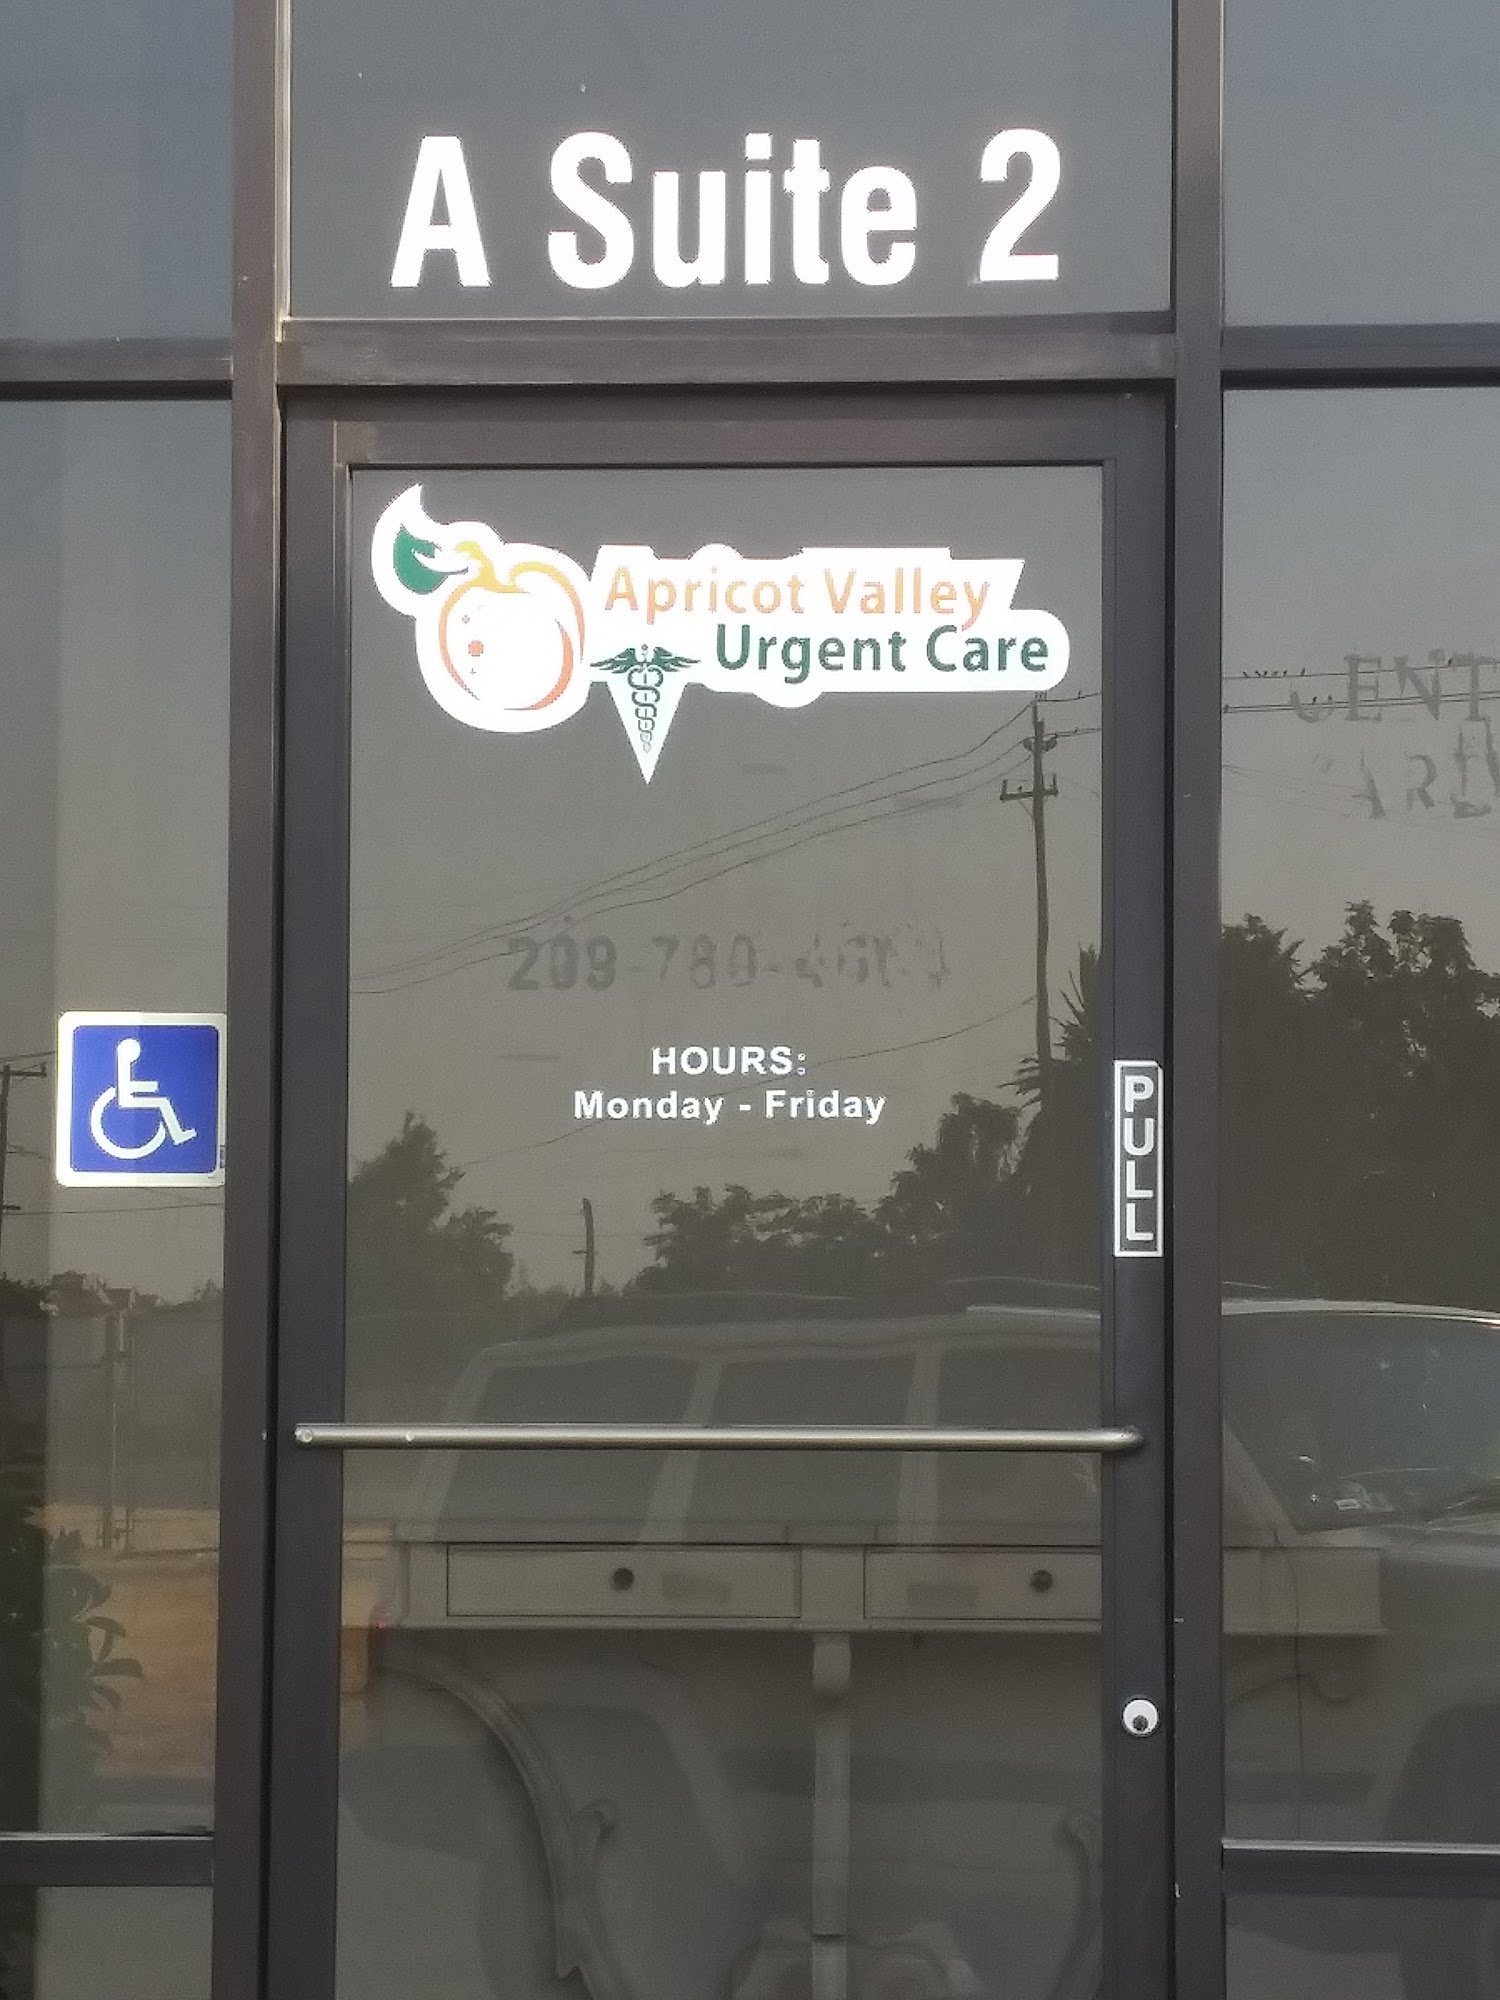 Apricot Valley Urgent Care & Aesthetics 1108 Ward Ave bldg a suite 2, Patterson California 95363